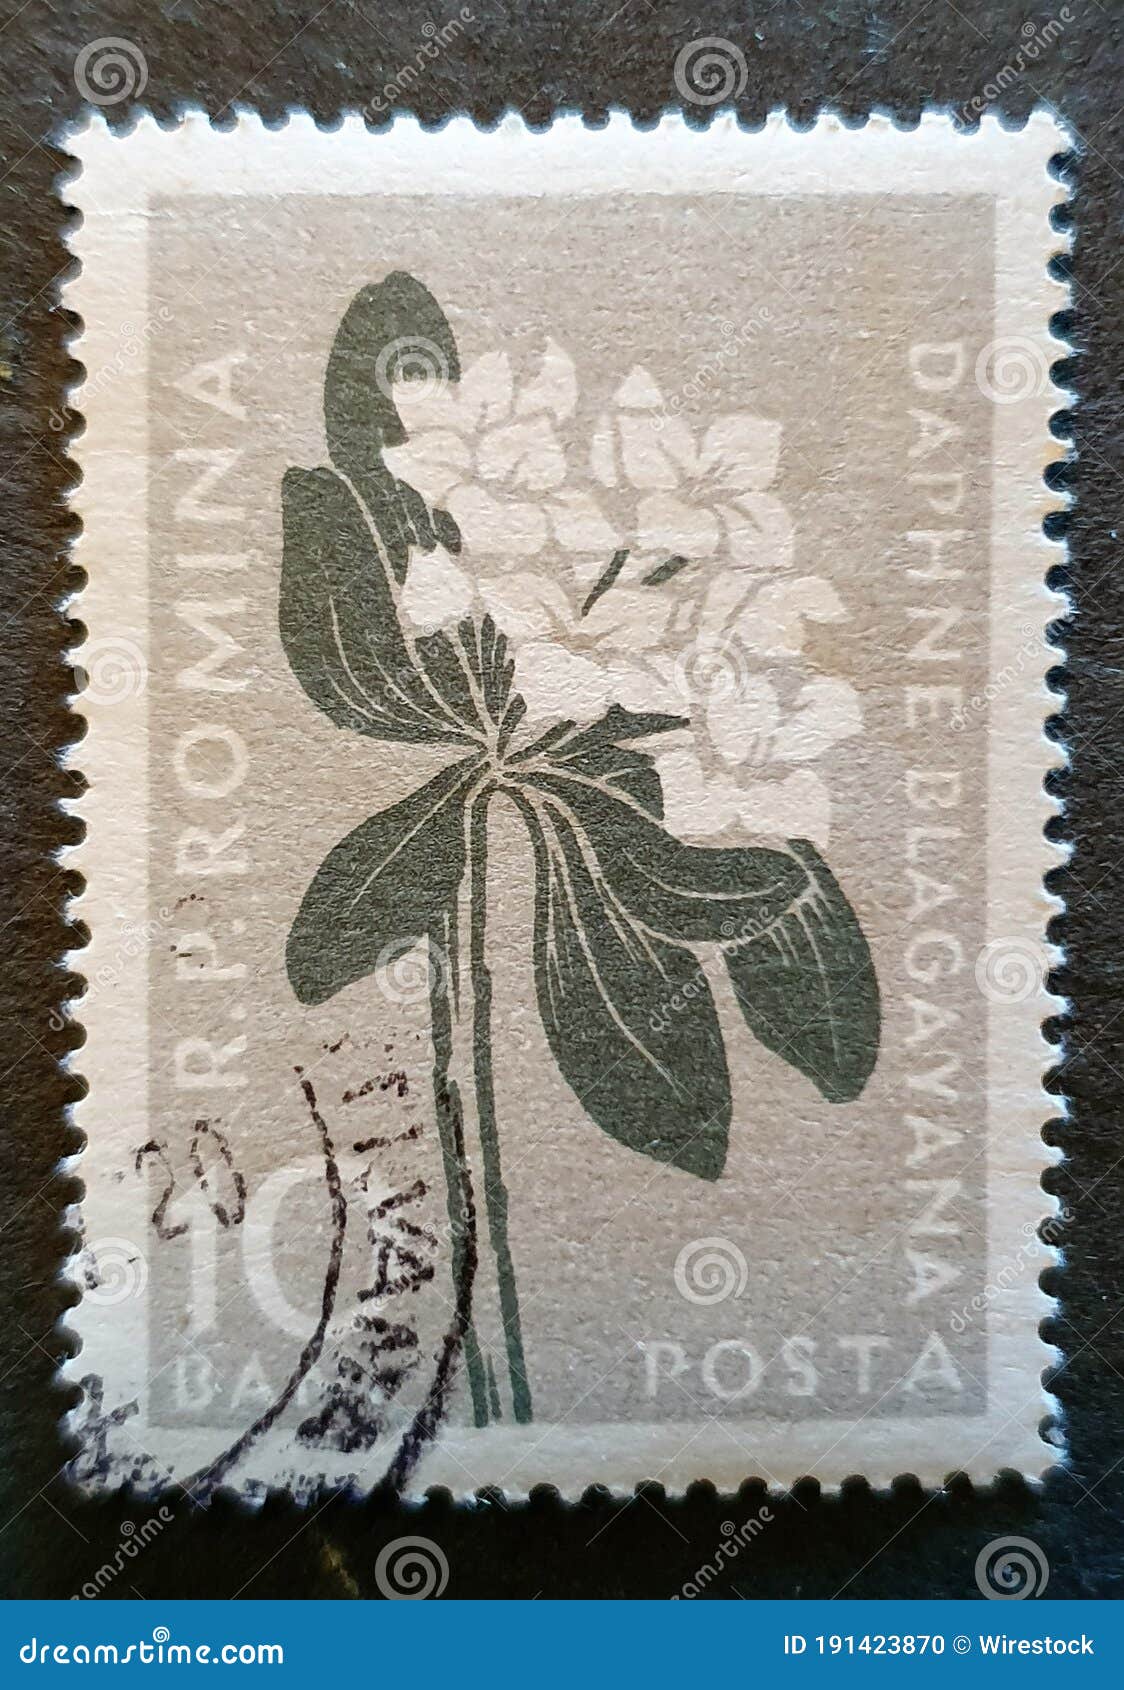 An Old Postage Stamp from Romania Circa 1960 with the Image of a Flower ...